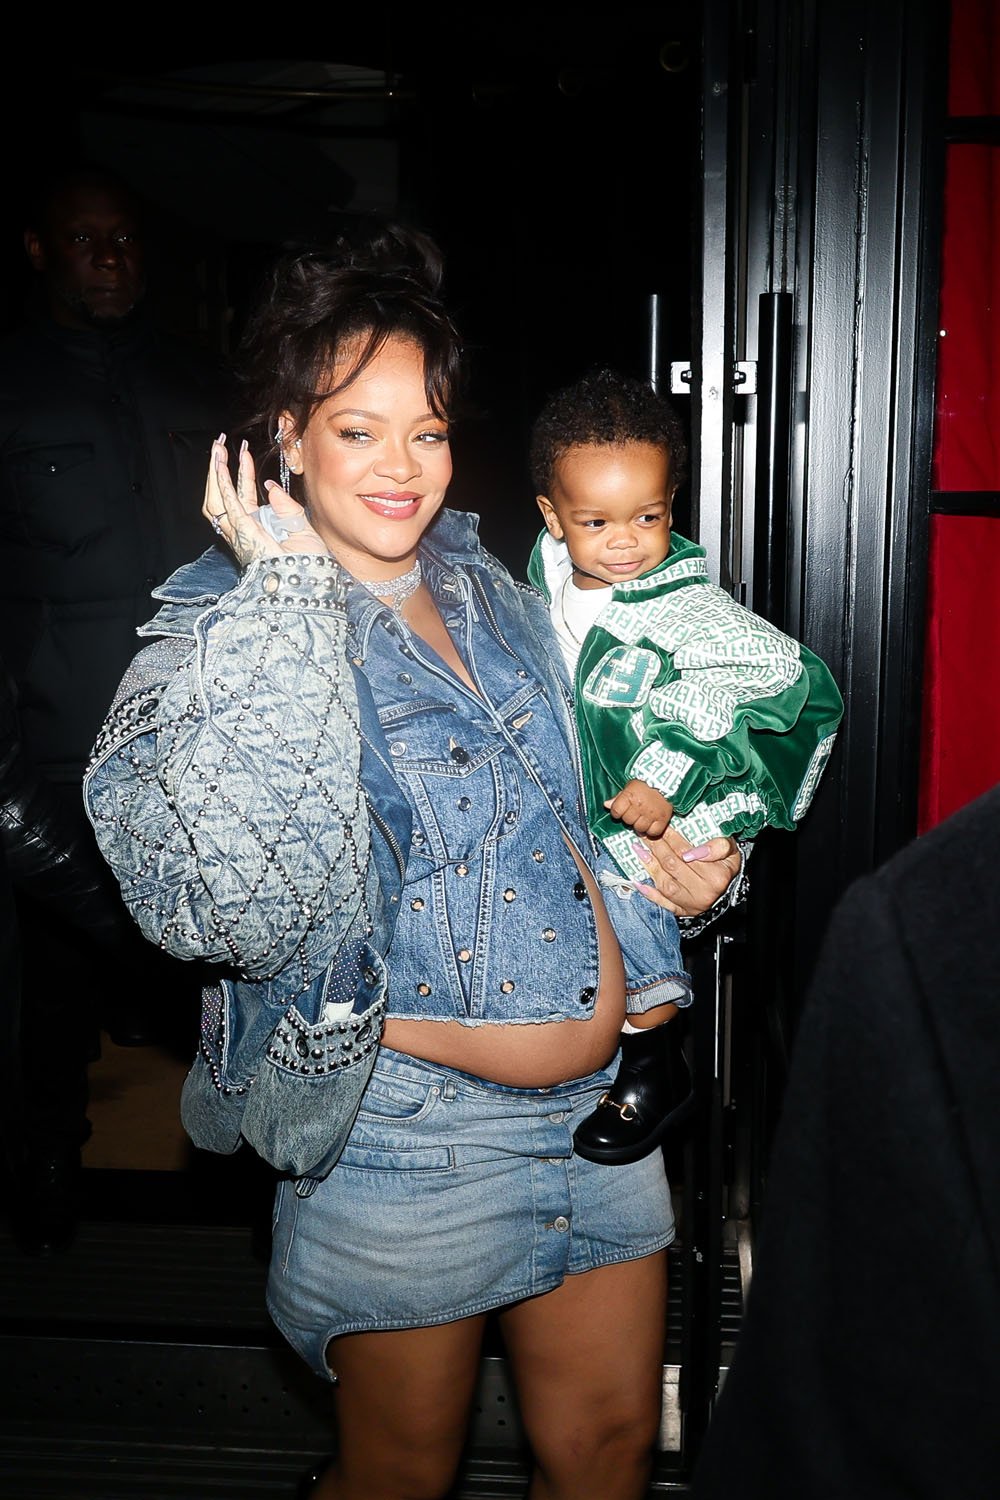 Rihanna in Paris with her adorable, stylish baby dressed in a velvet